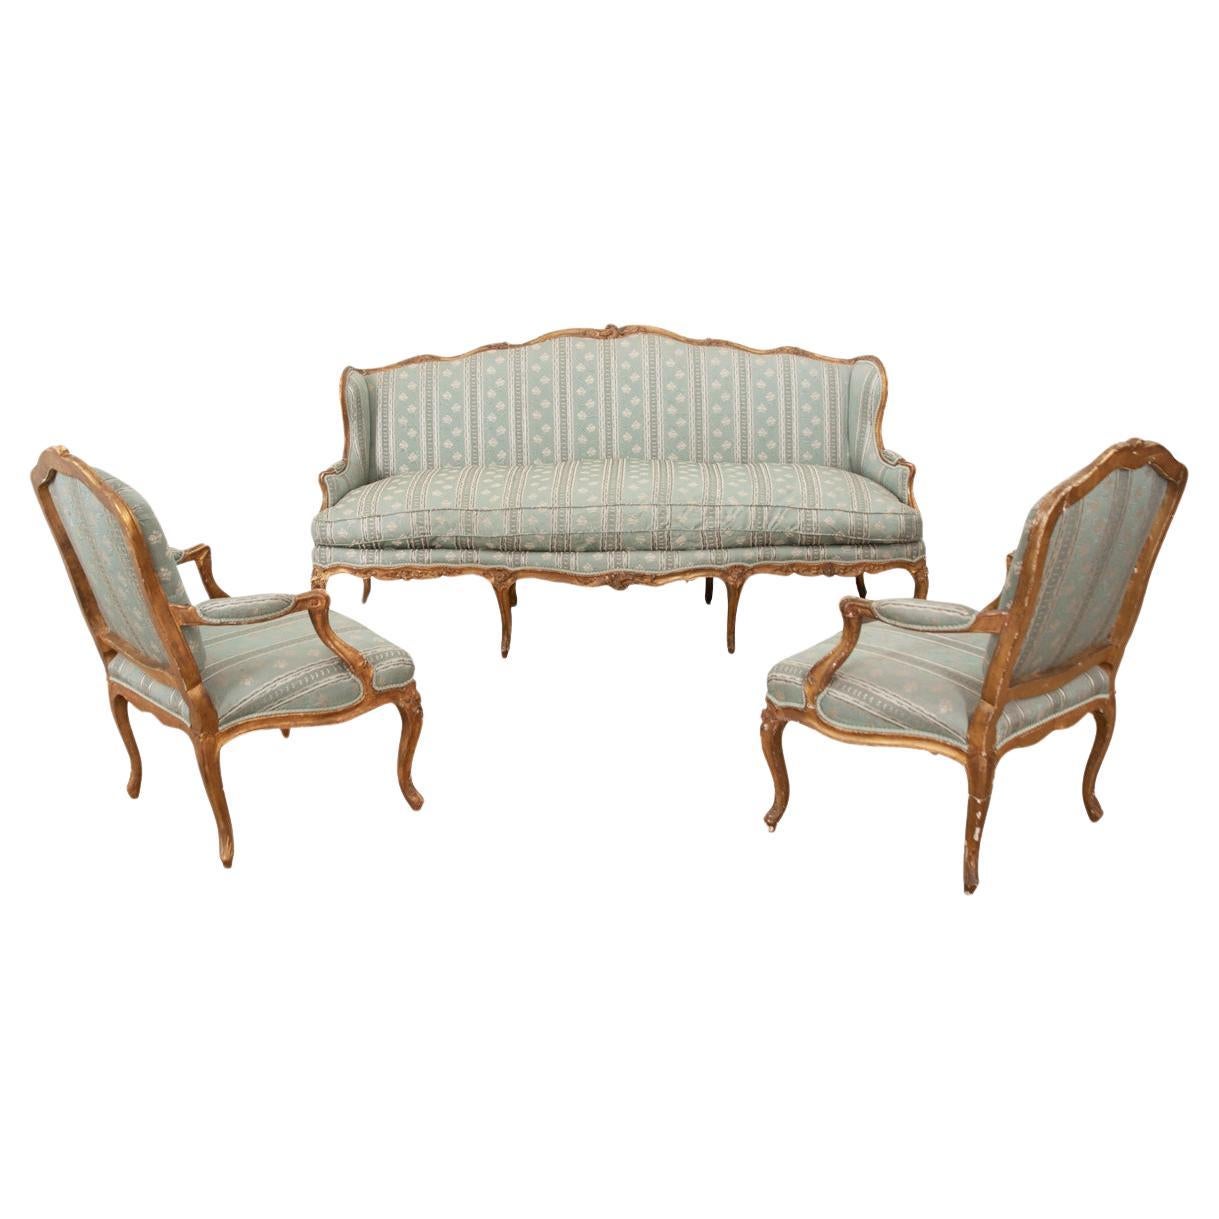 18th Century Louis XV Style Gilt & Upholstered Parlor Set